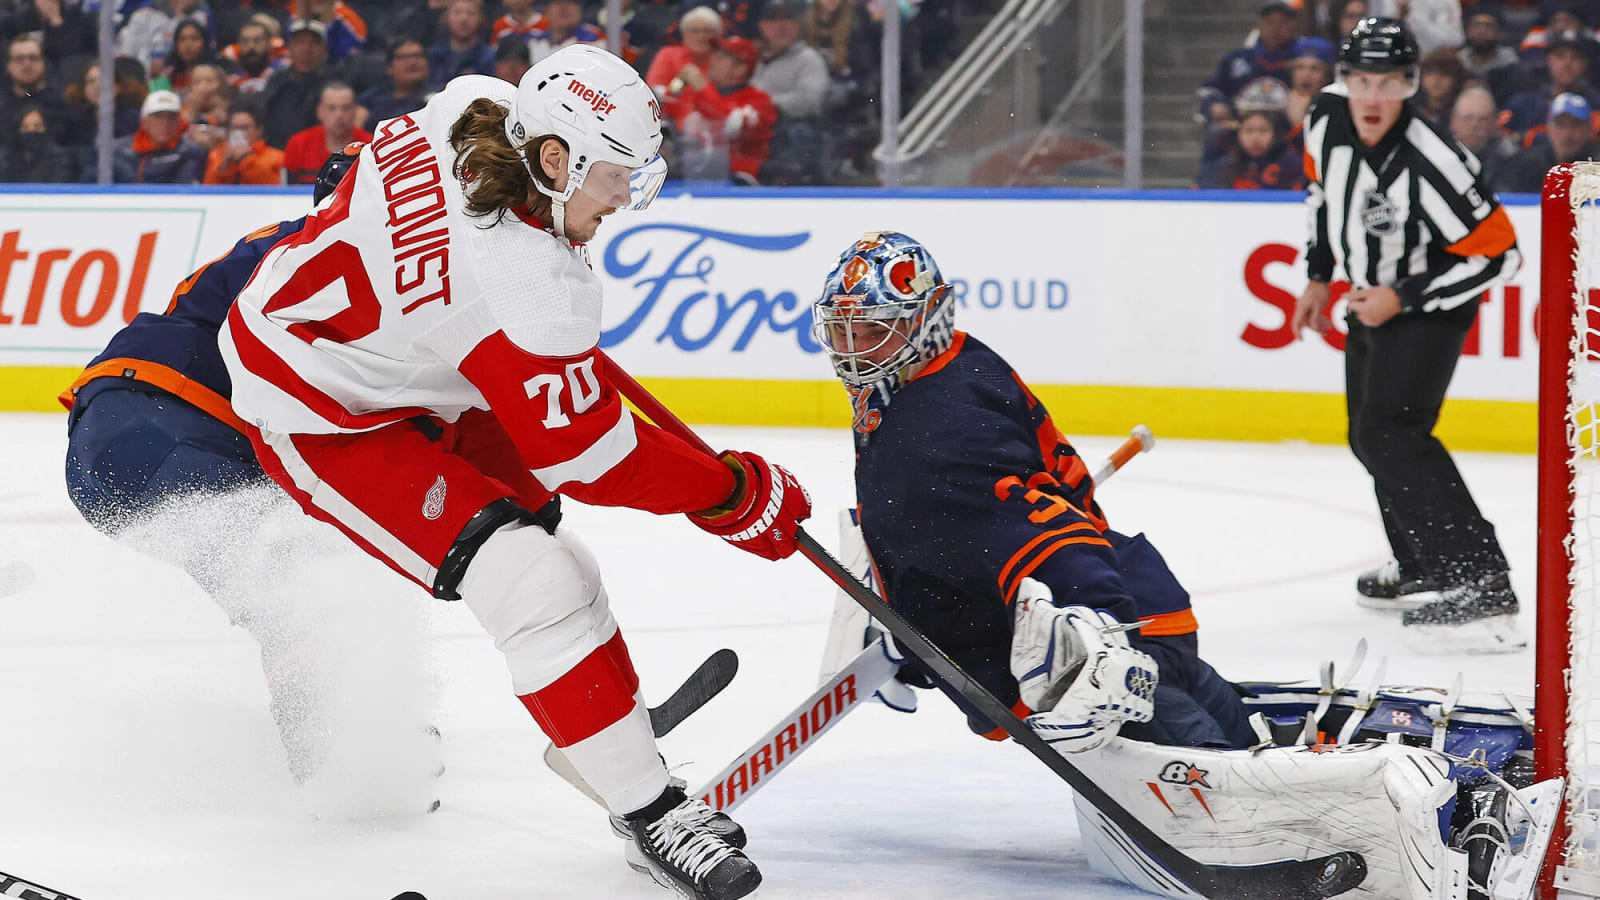 4 Takeaways From Oilers’ 5-4 Shootout Loss to Red Wings